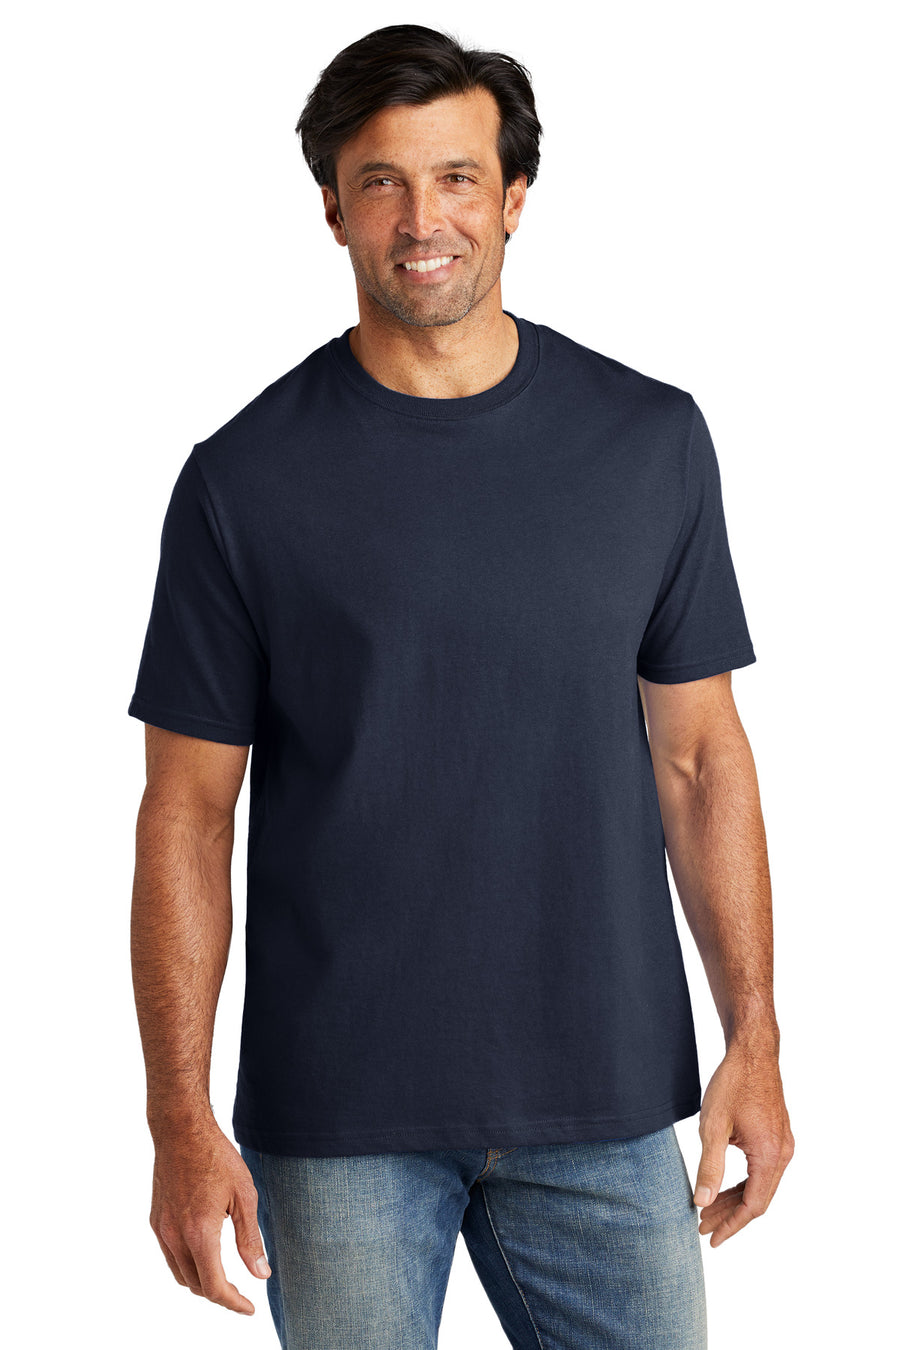 VL100-Strong Navy-front_model